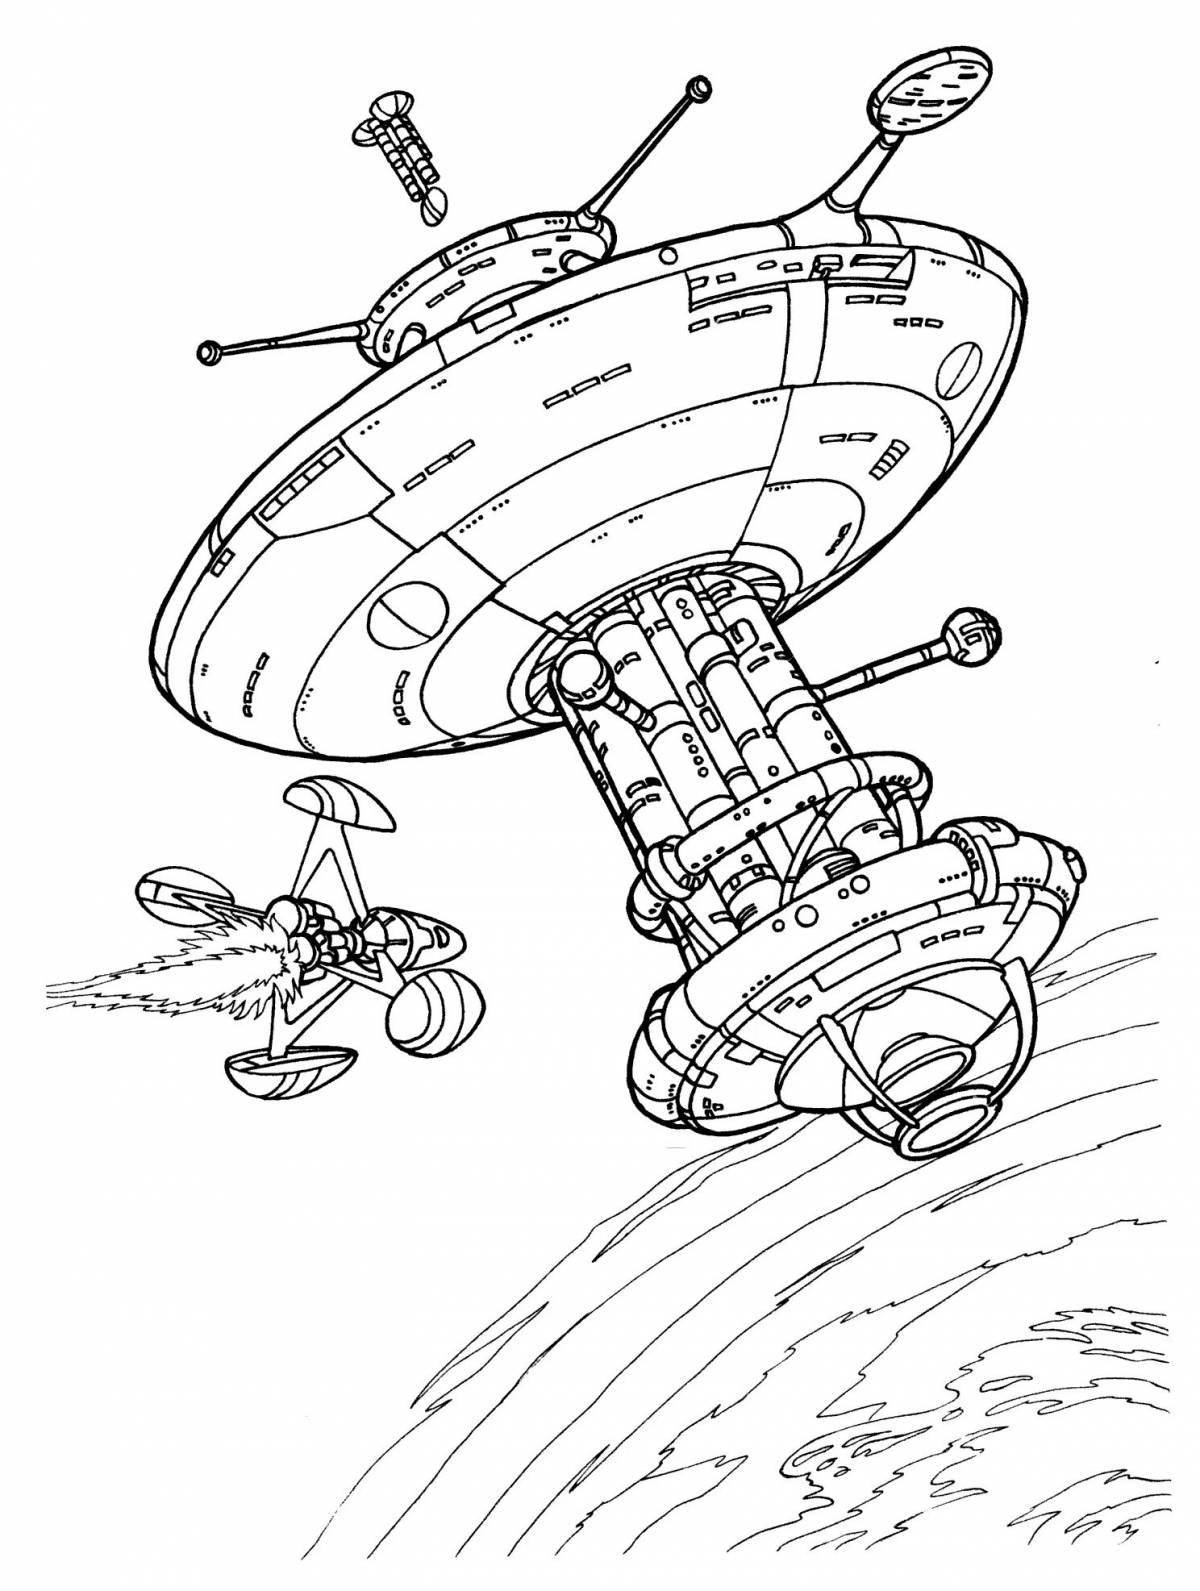 Gorgeous Space Station coloring page